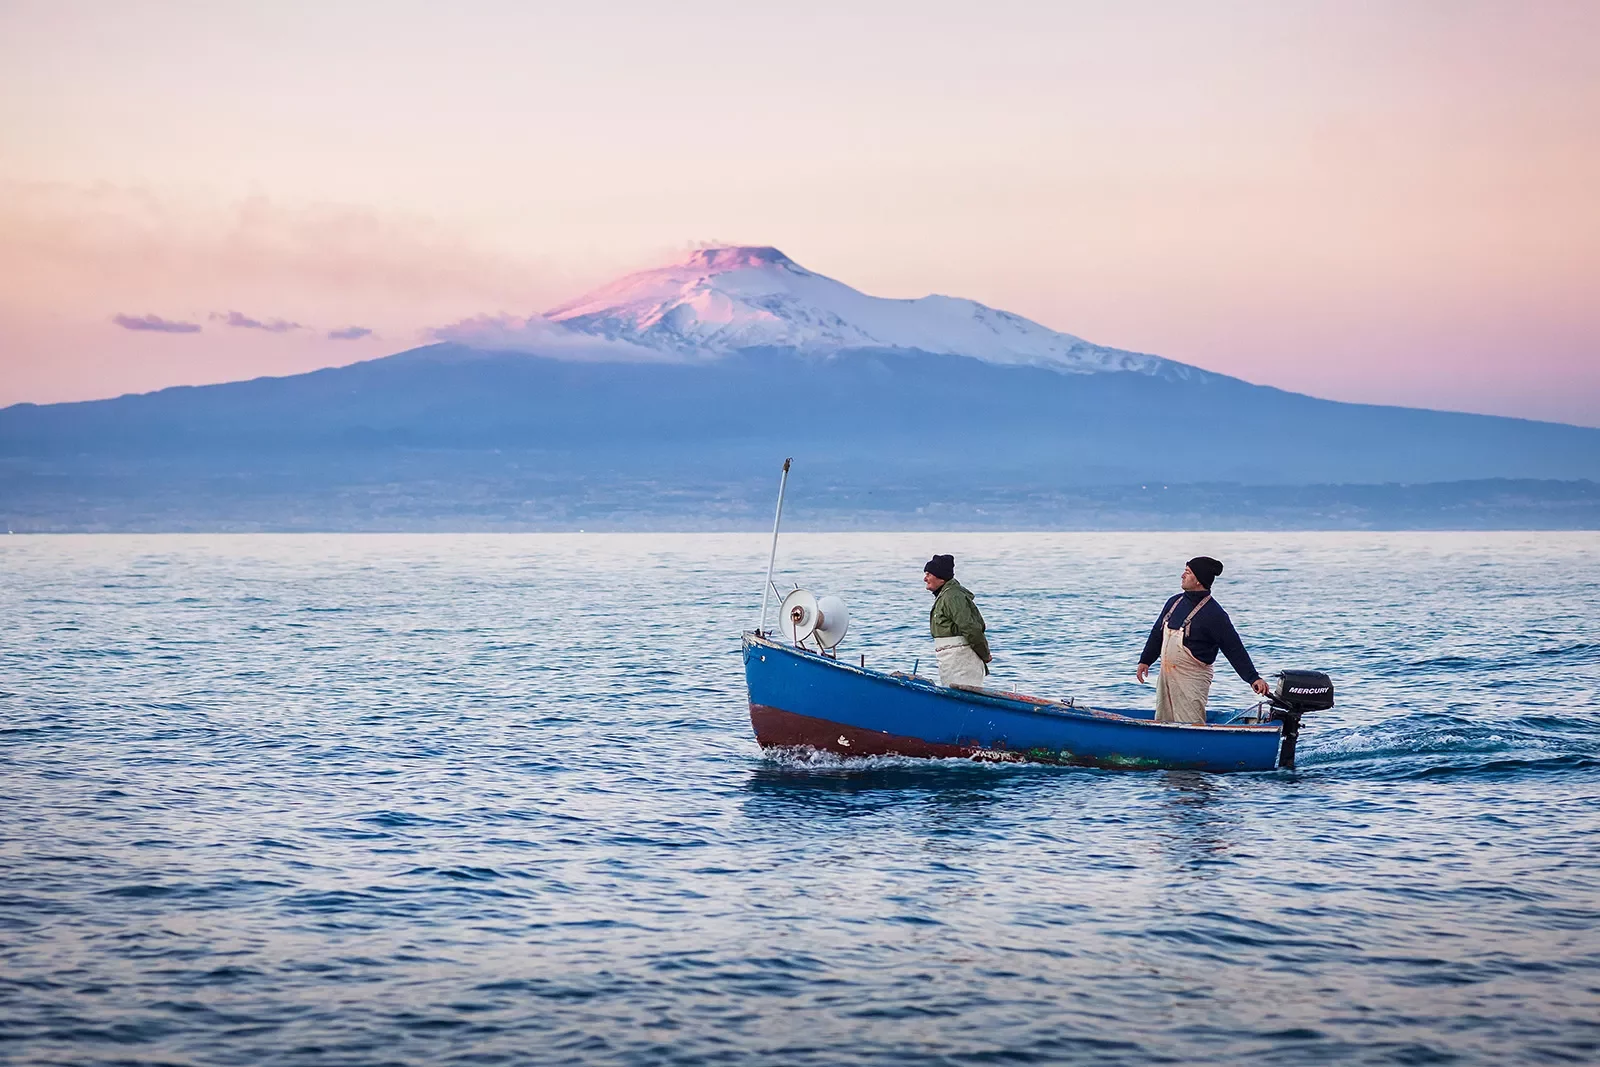 Two locals on boat during sunset, large mountain in distance.